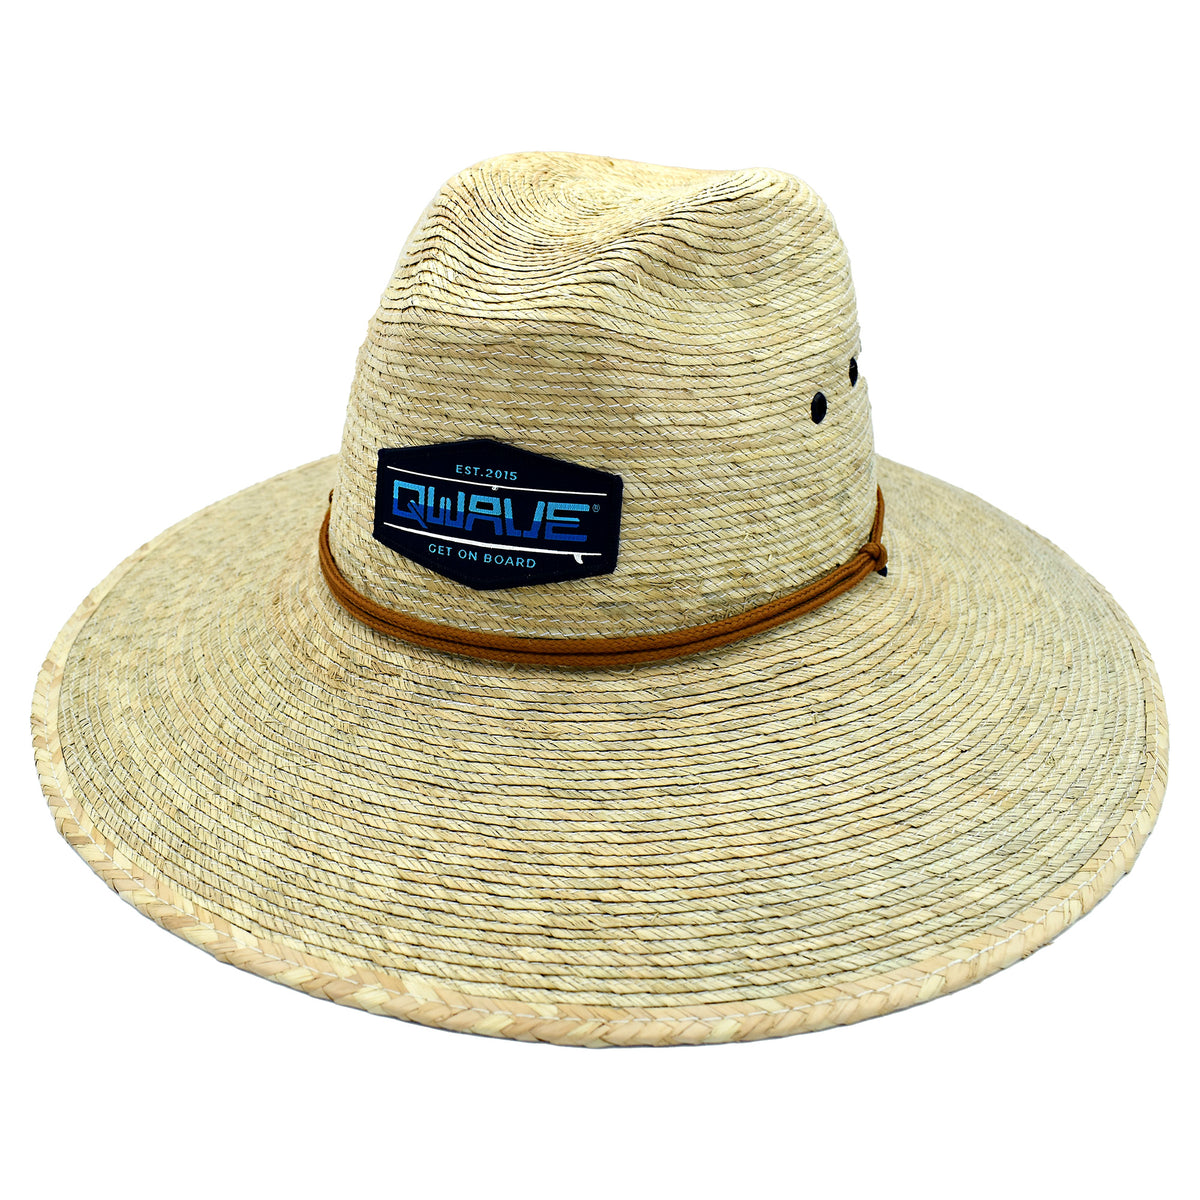 Qwave Packable Stone-Washed Straw Lifeguard Hat for Men and Women - Beach Straw  Hat Protects from Summer Sun - Gnarly Navy